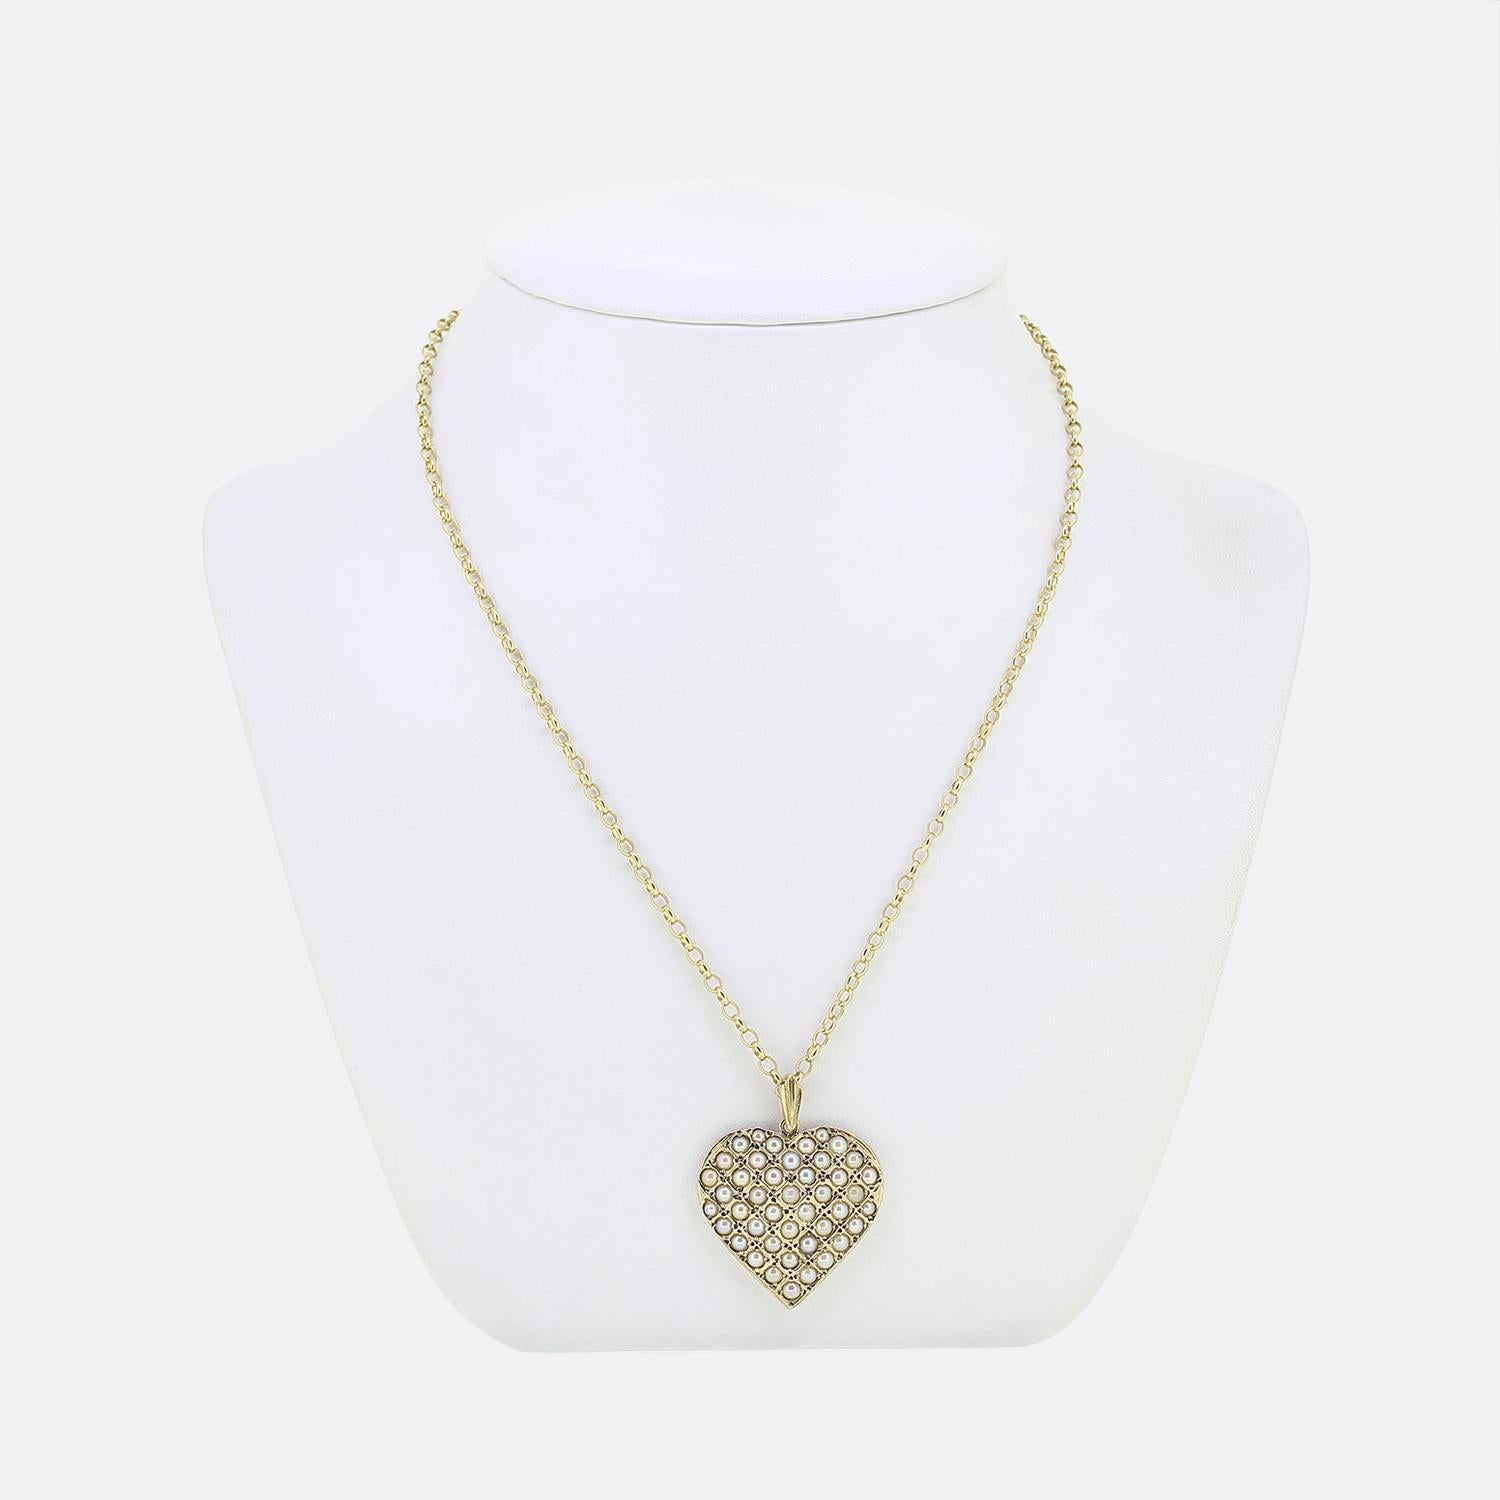 Here we have a gorgeous pearl pendant necklace. This vintage piece has been crafted from 9ct yellow gold with the pendant forming the shape of a love heart. This large motif plays host to a vast array of round shaped cultured pearls; each of which